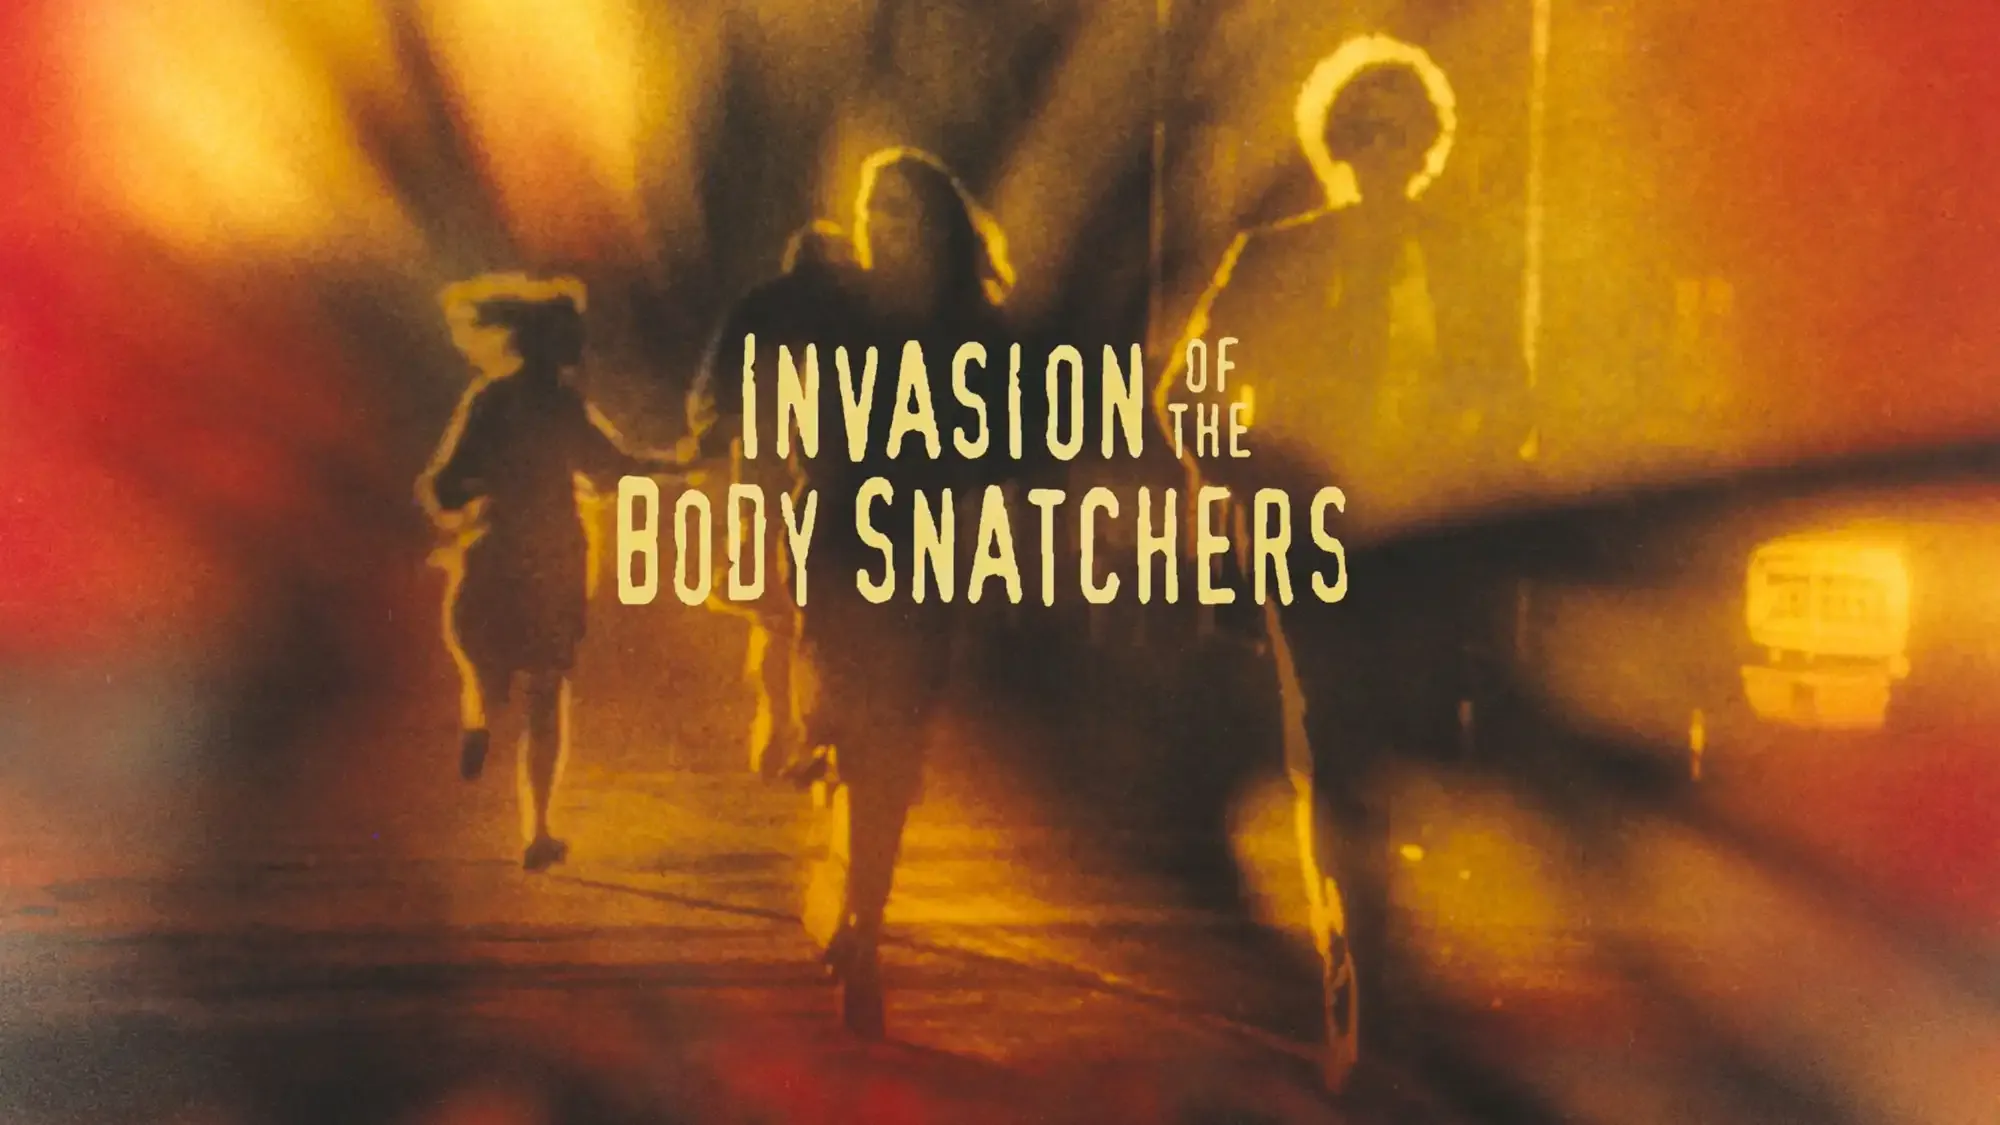 Invasion of the Body Snatchers movie review